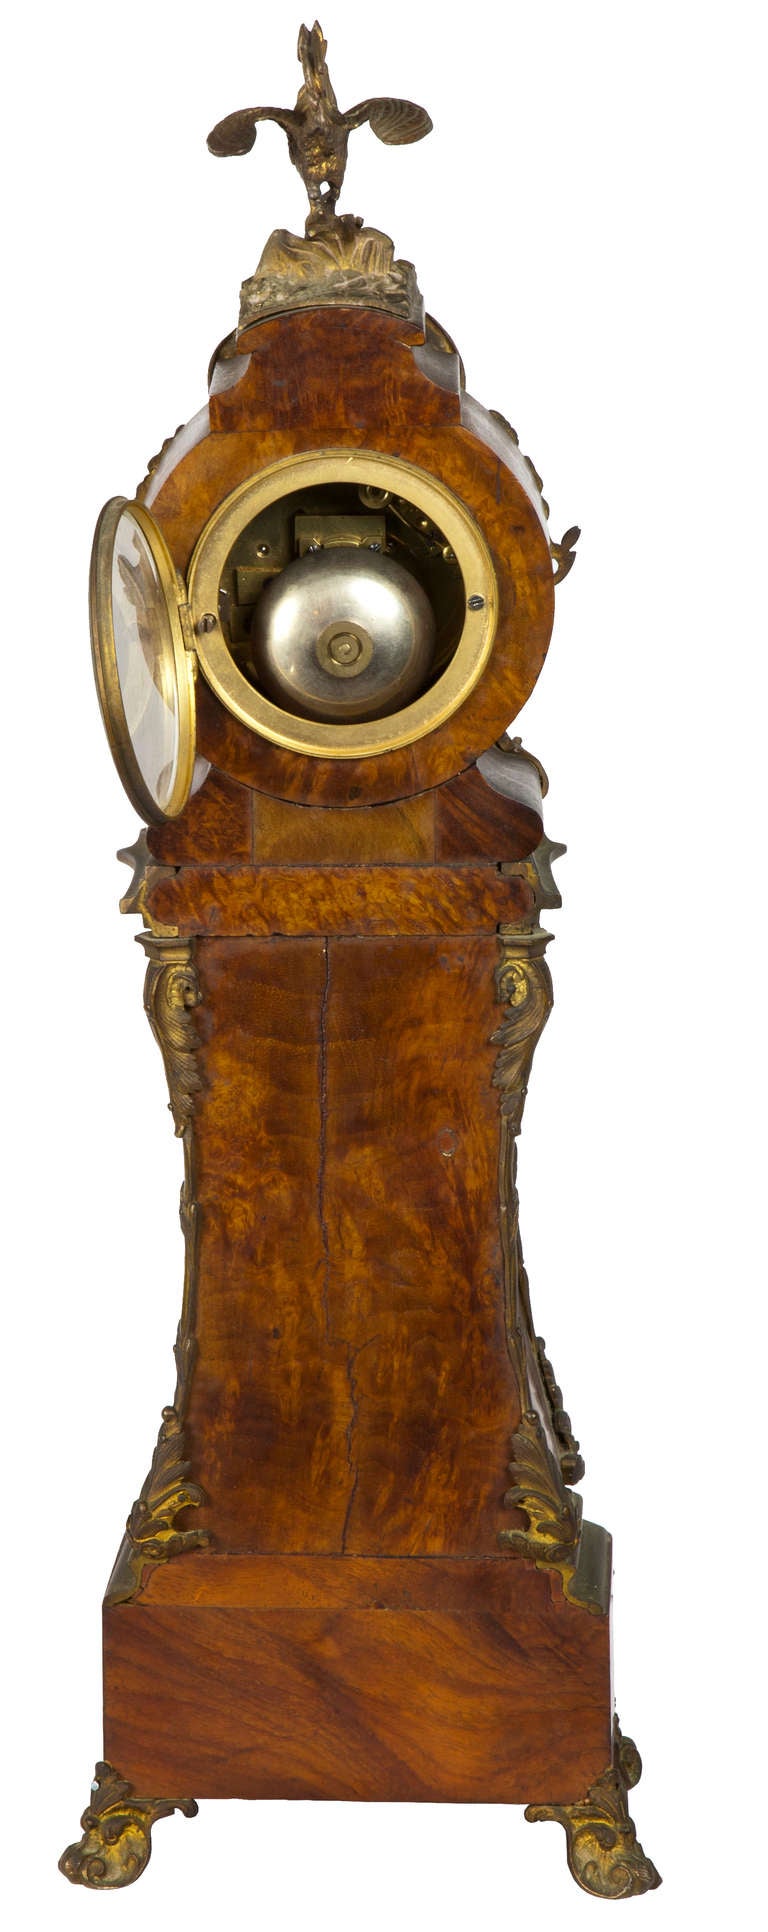 Rococo Revival Fine Miniature Ormolu-Mounted, Burled Mantel Clock with Pagoda Top and Rooster